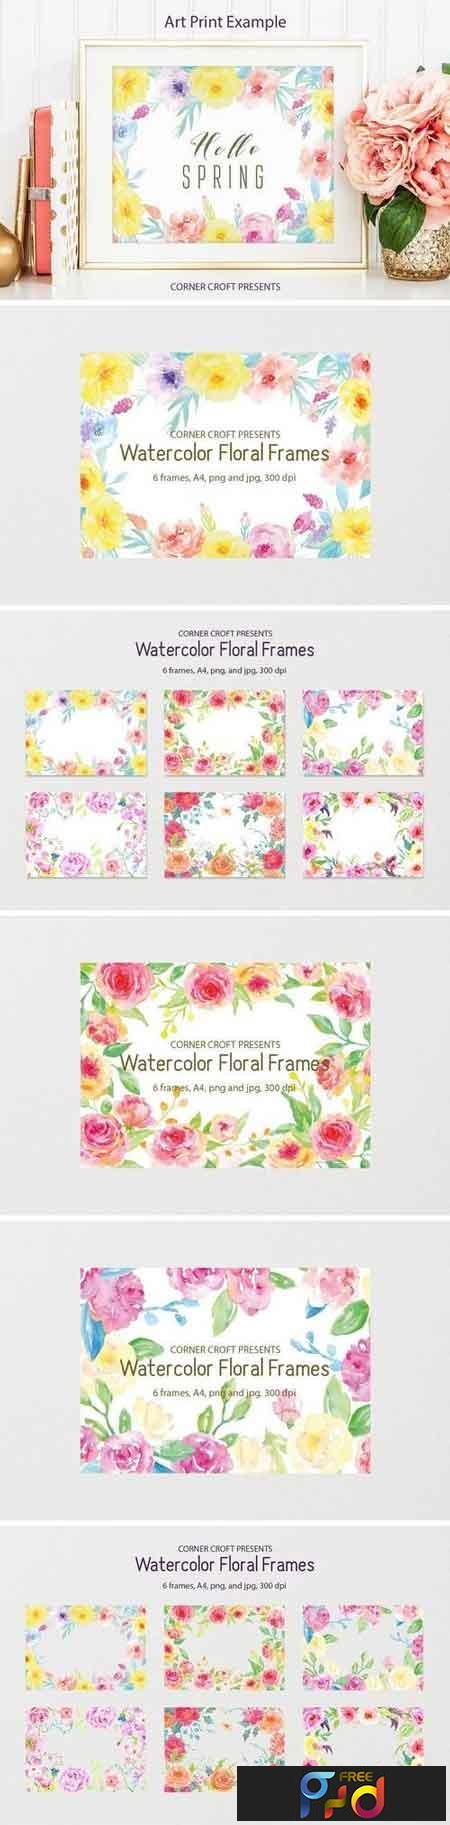 Watercolor floral frame yellow and pink 1